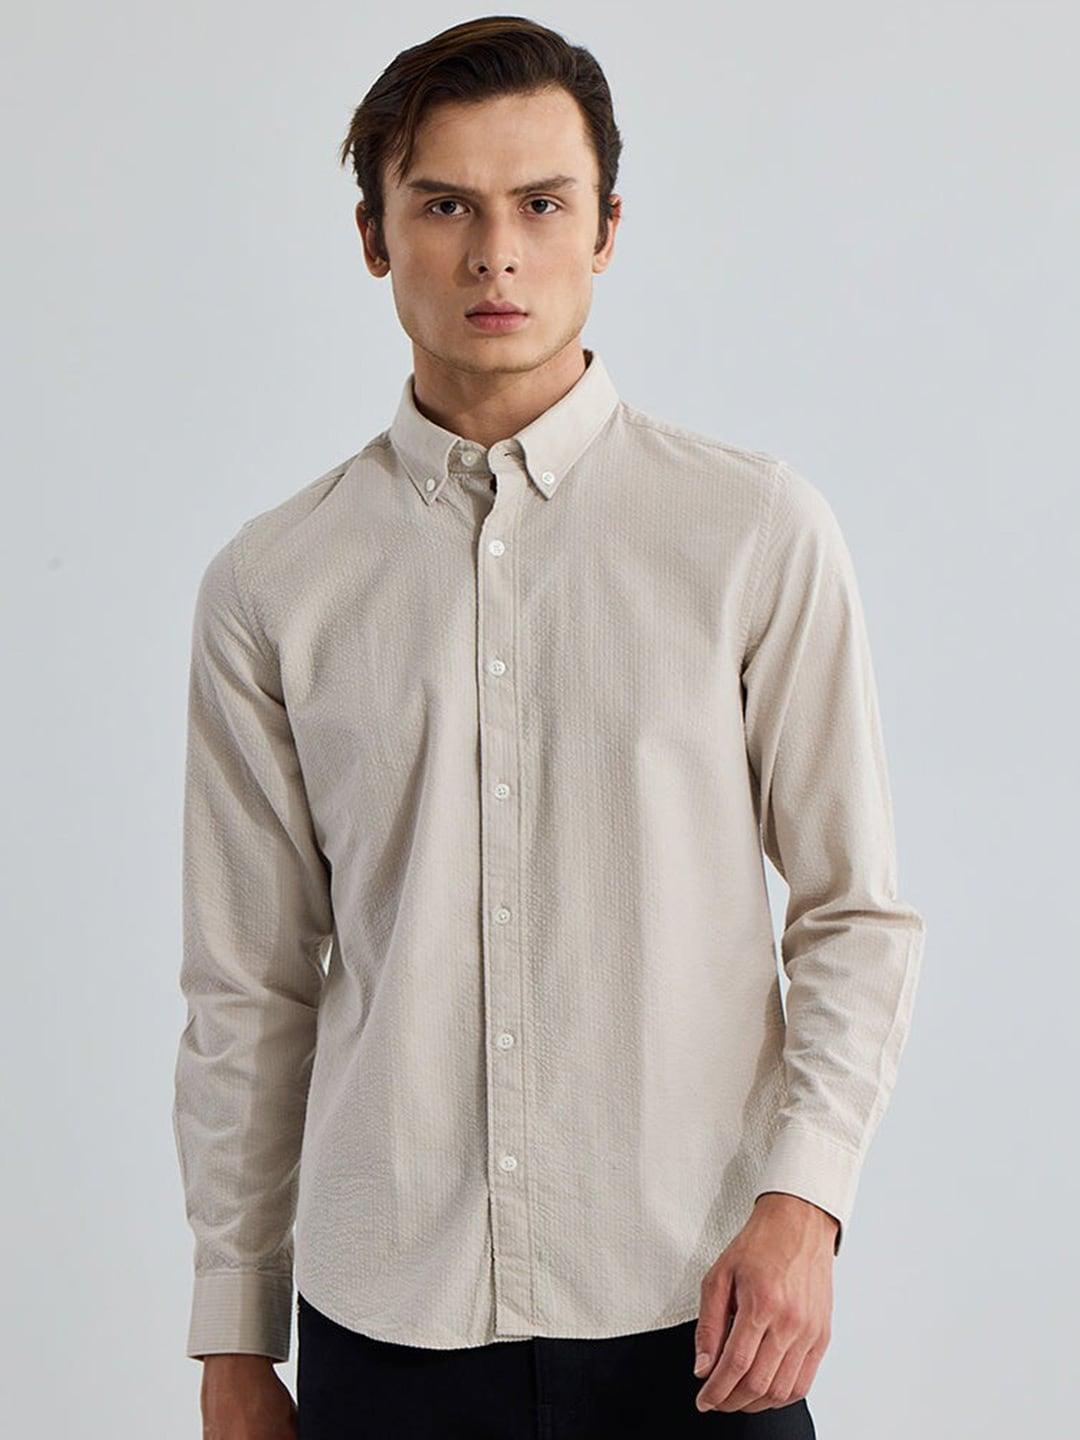 snitch textured button-down collar classic slim fit pure cotton casual shirt